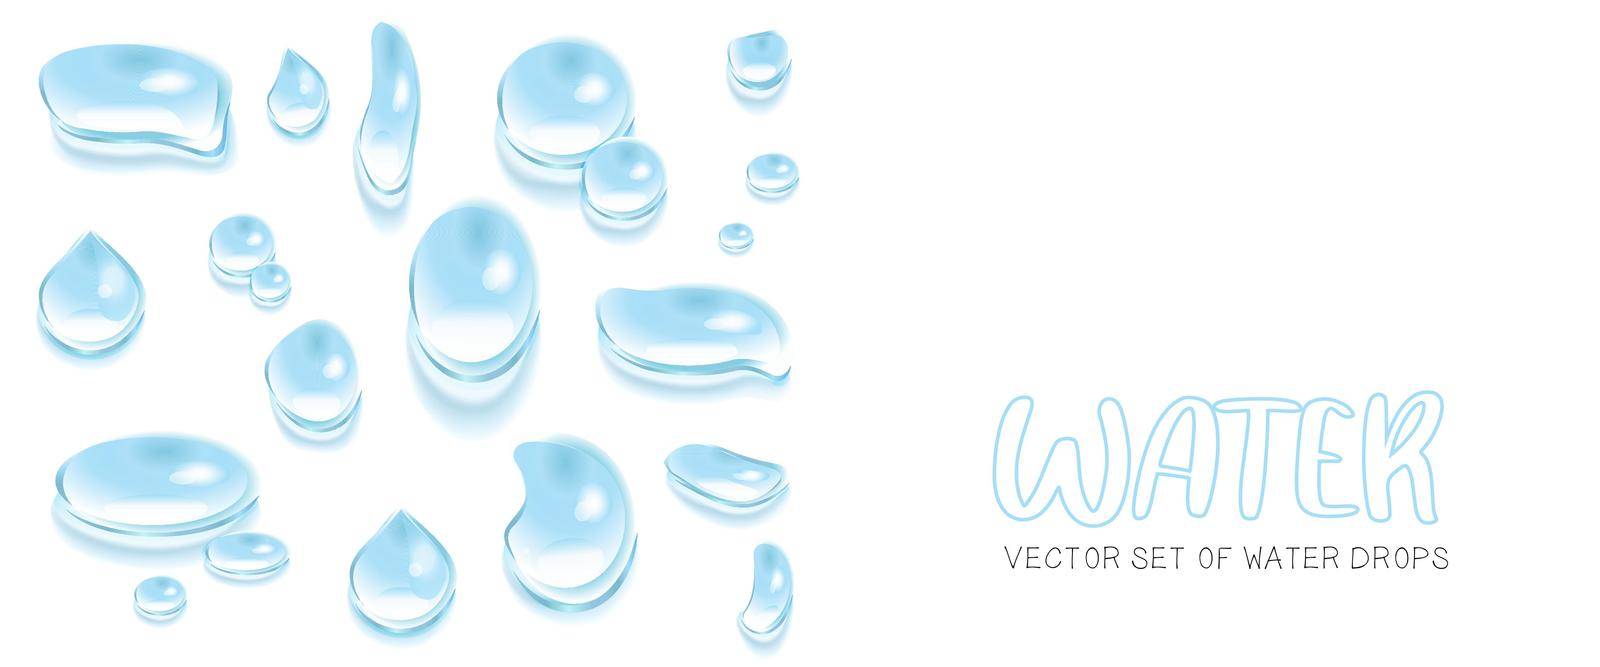 Vector set of water drops on a white background. A realistic image of the droplets.